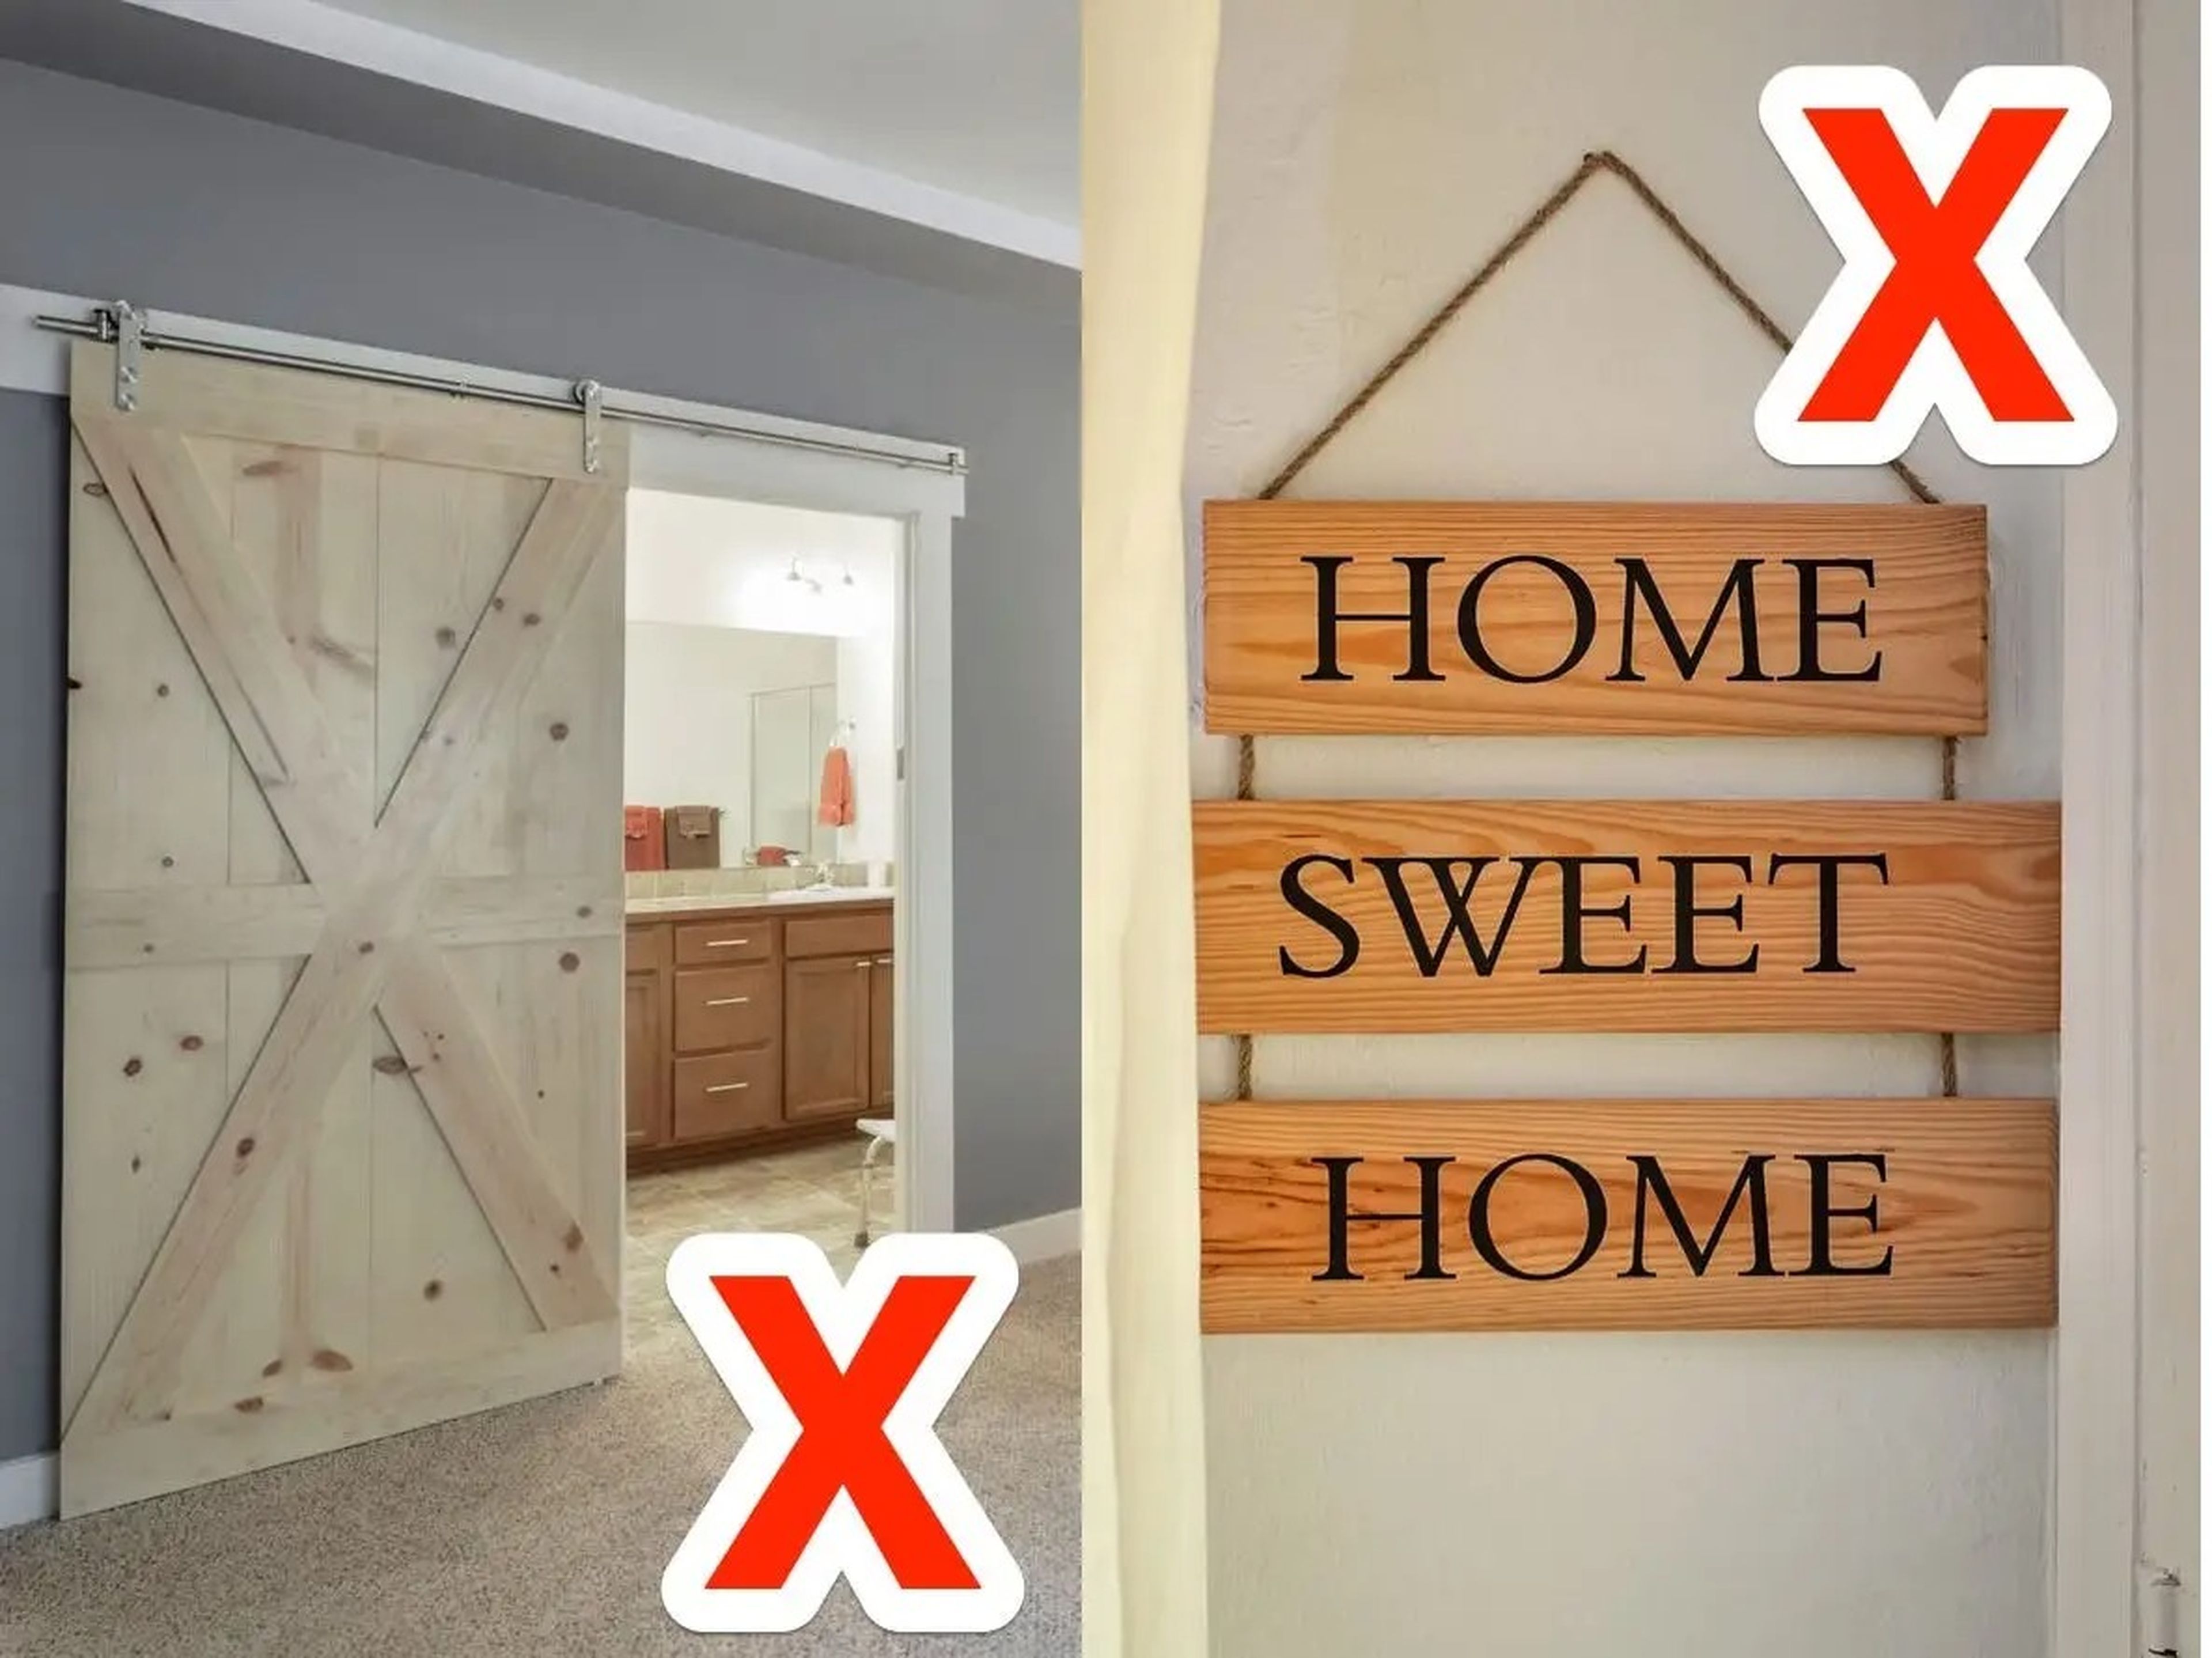 barn door in room with carpet (left); wood sign with "home sweet home" written on it (right)